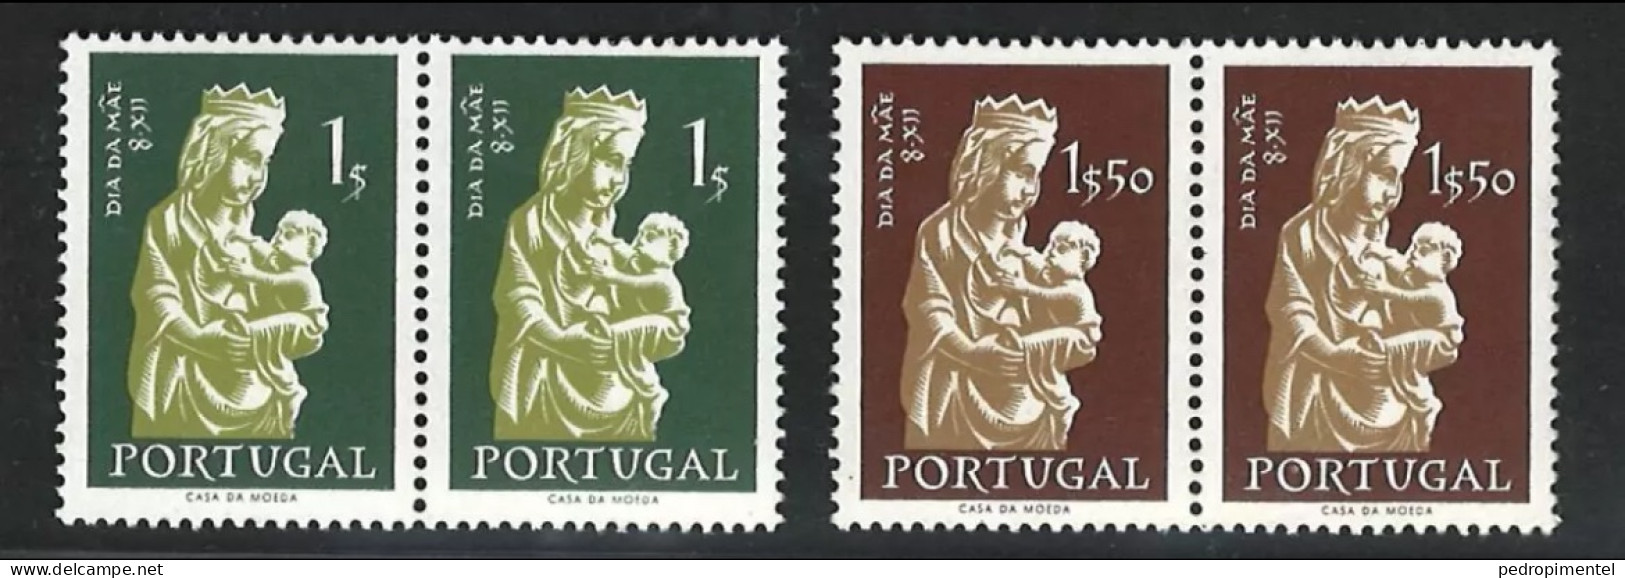 Portugal Stamps 1956 "Mothers Day" Condition MNH #825-826 (Pair) - Nuovi